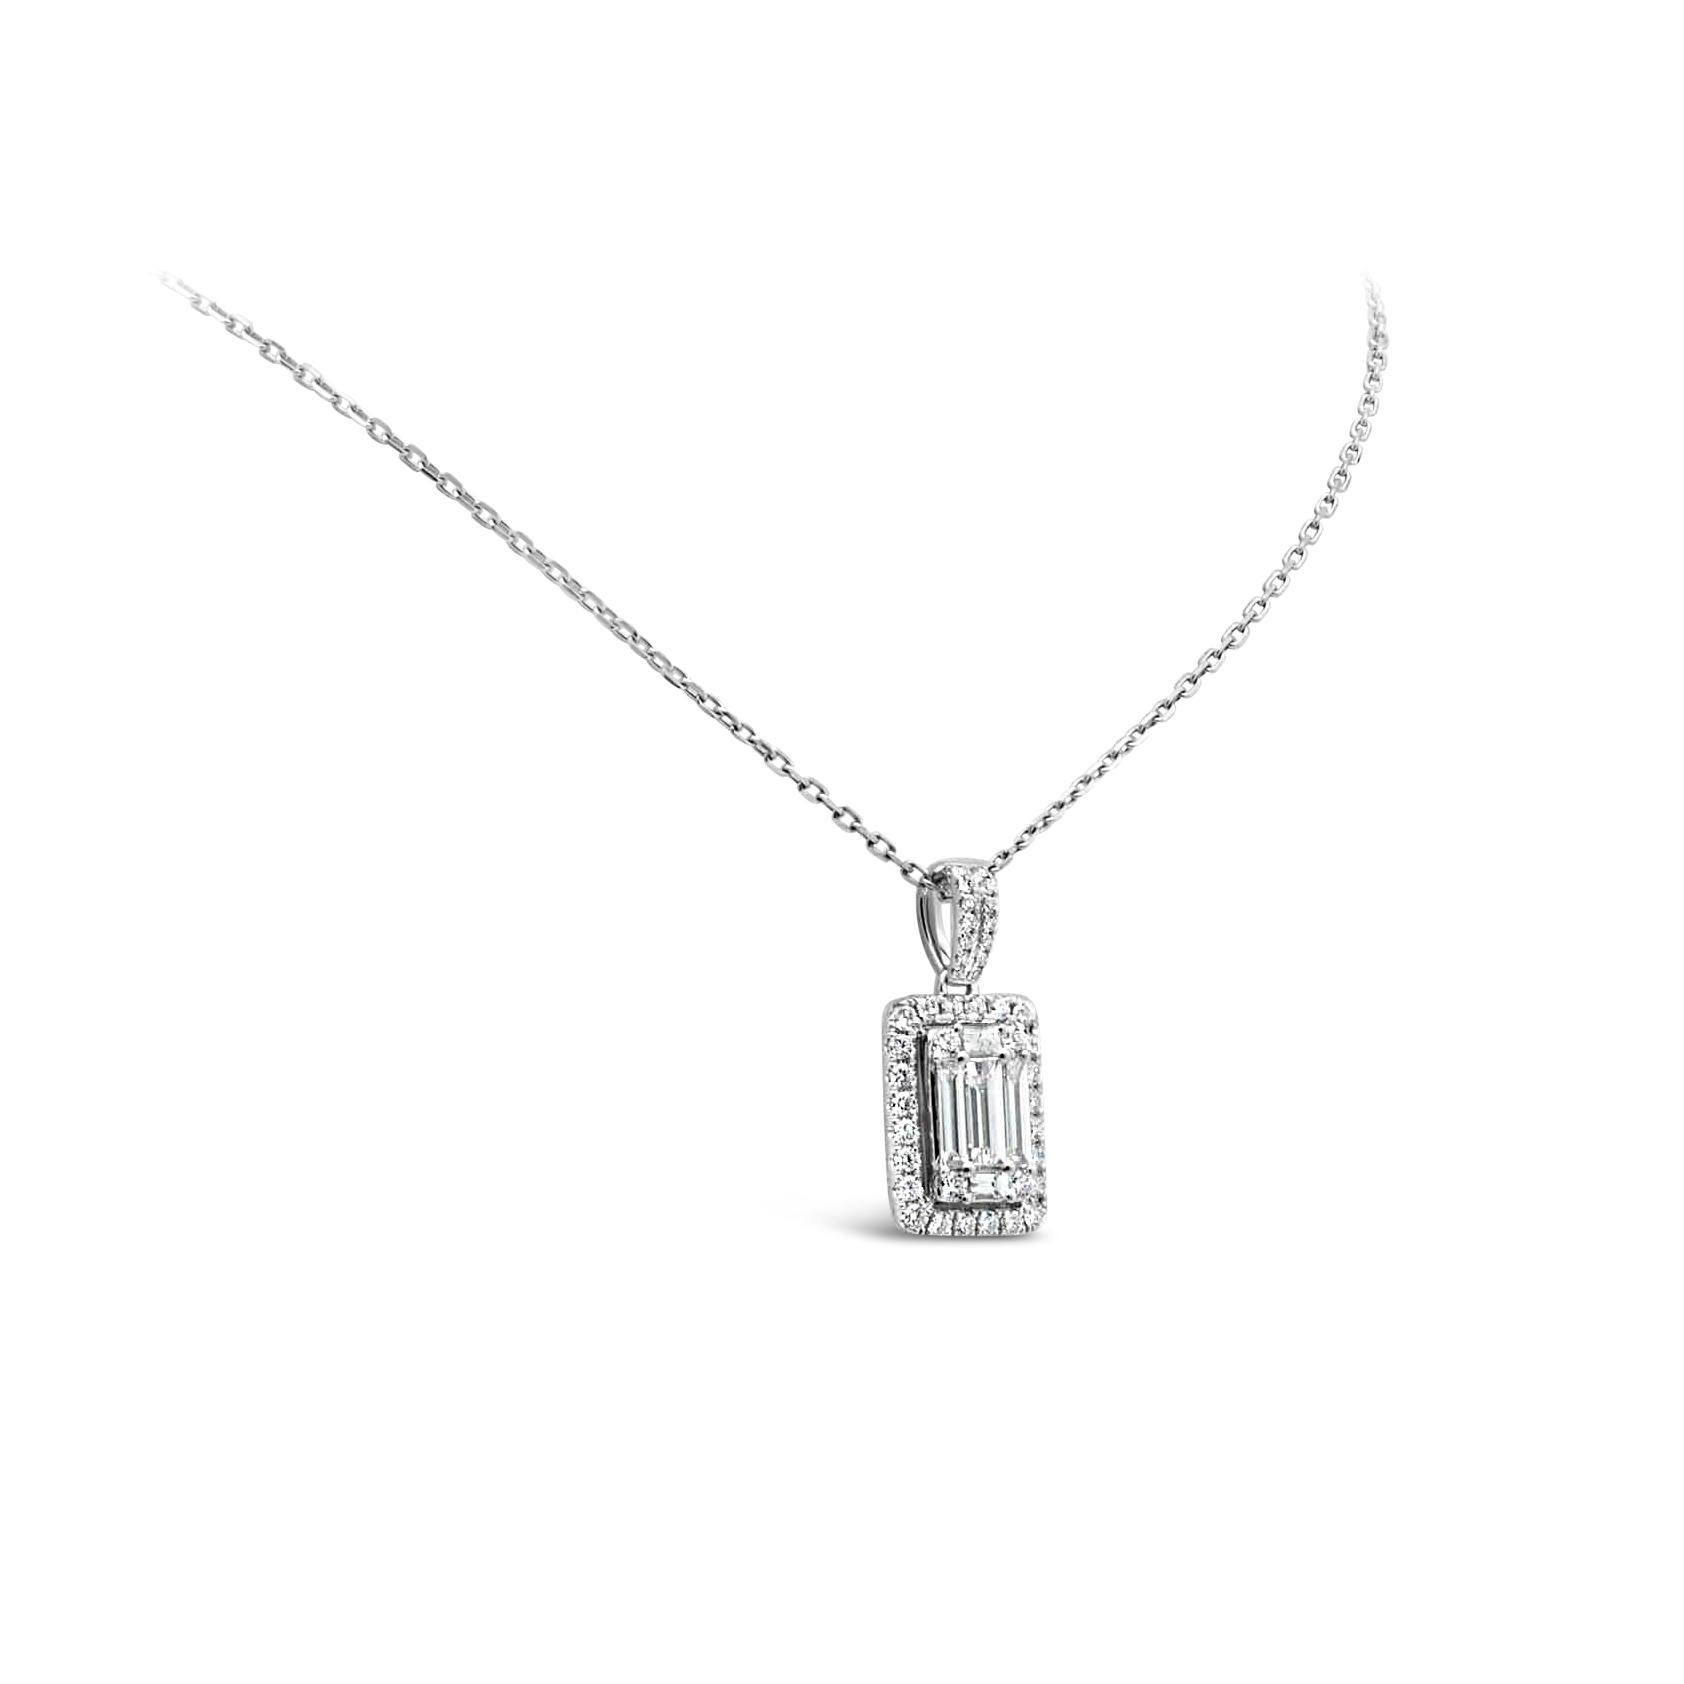 A beautiful necklace, showcasing baguette diamonds connected to look like a single large emerald cut diamond surrounded by a diamond halo on an accented bale and suspended on an 18K white gold chain. The diamonds weigh 1.25 carats total. 

Roman